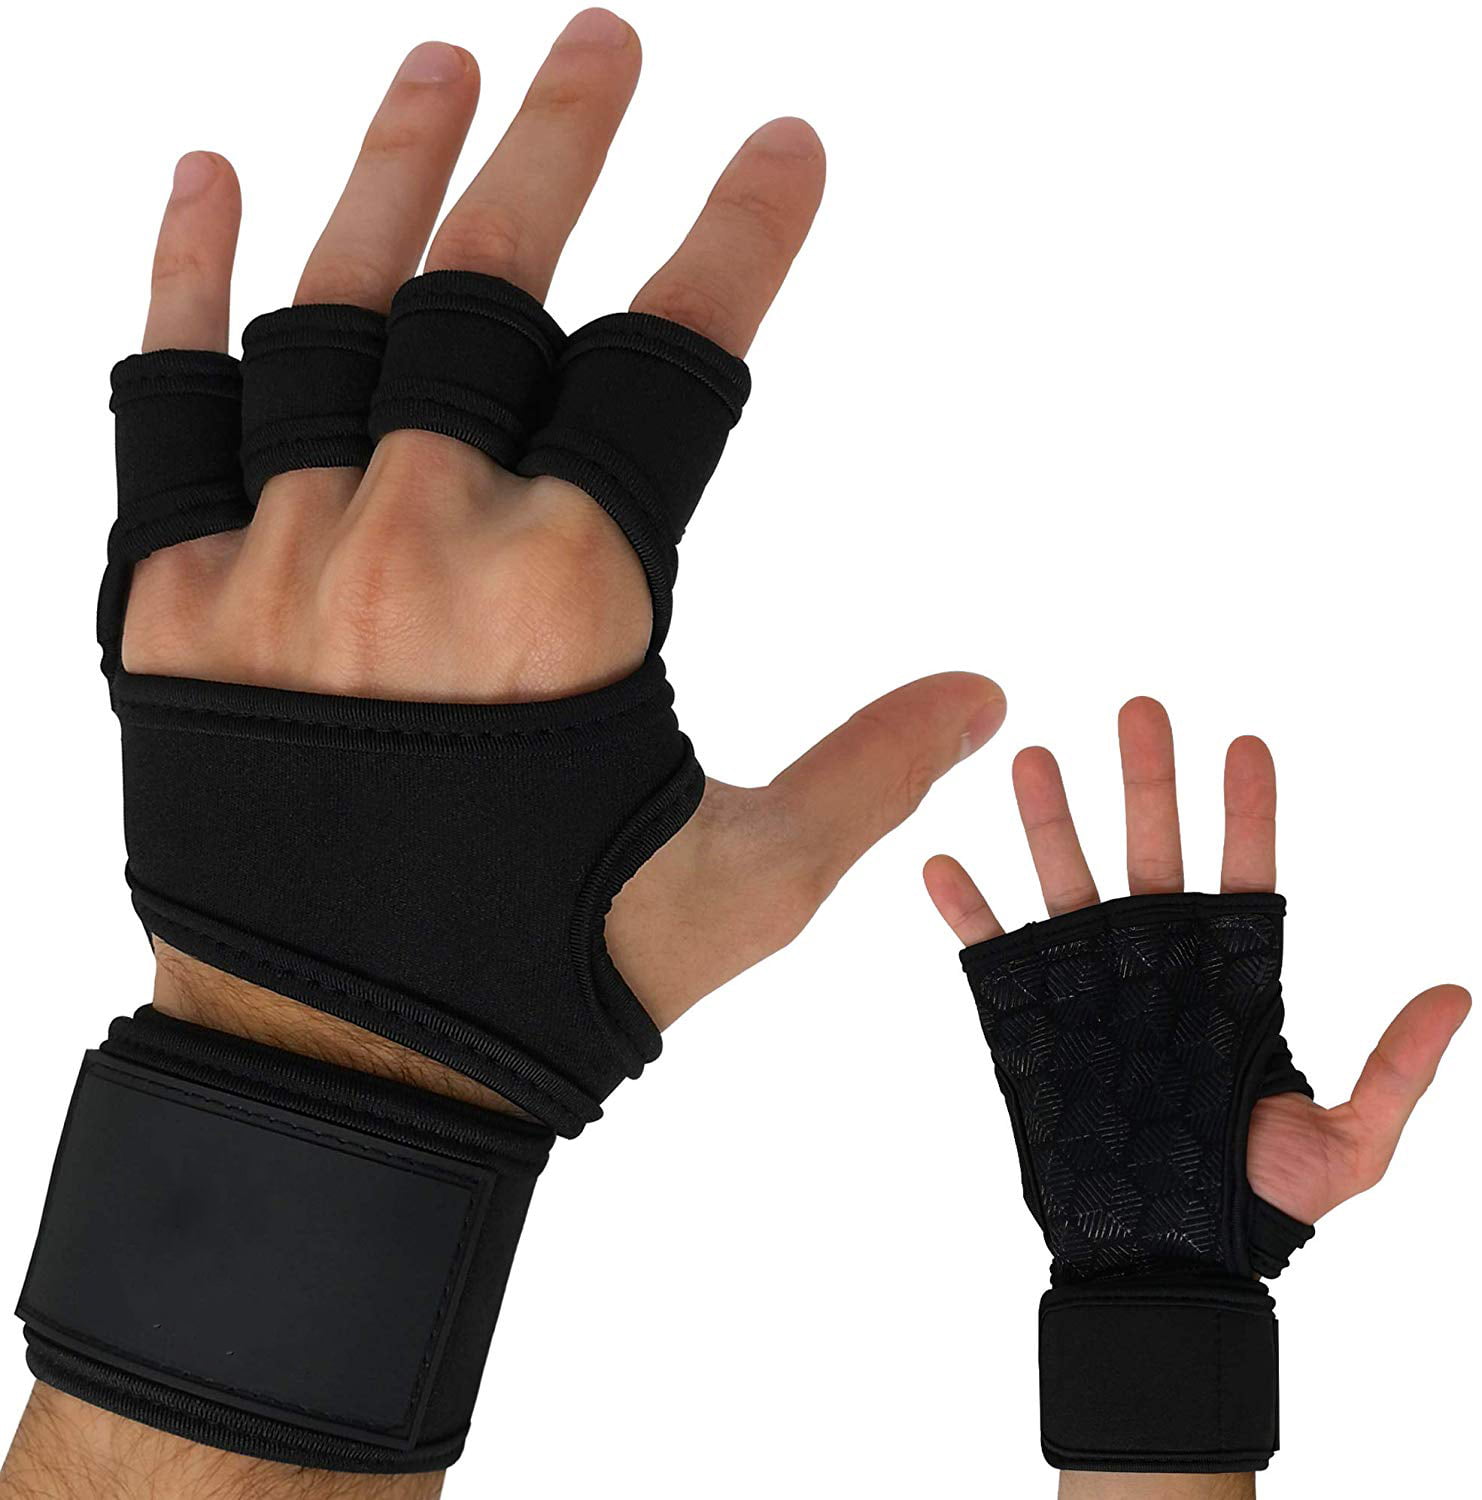 and Other Exercises. Chin Ups Elite Sports Cross Training Gloves with Wrist Straps Gloves for Pull Ups Non-Slip Palm Silicone Weight Lifting Gloves